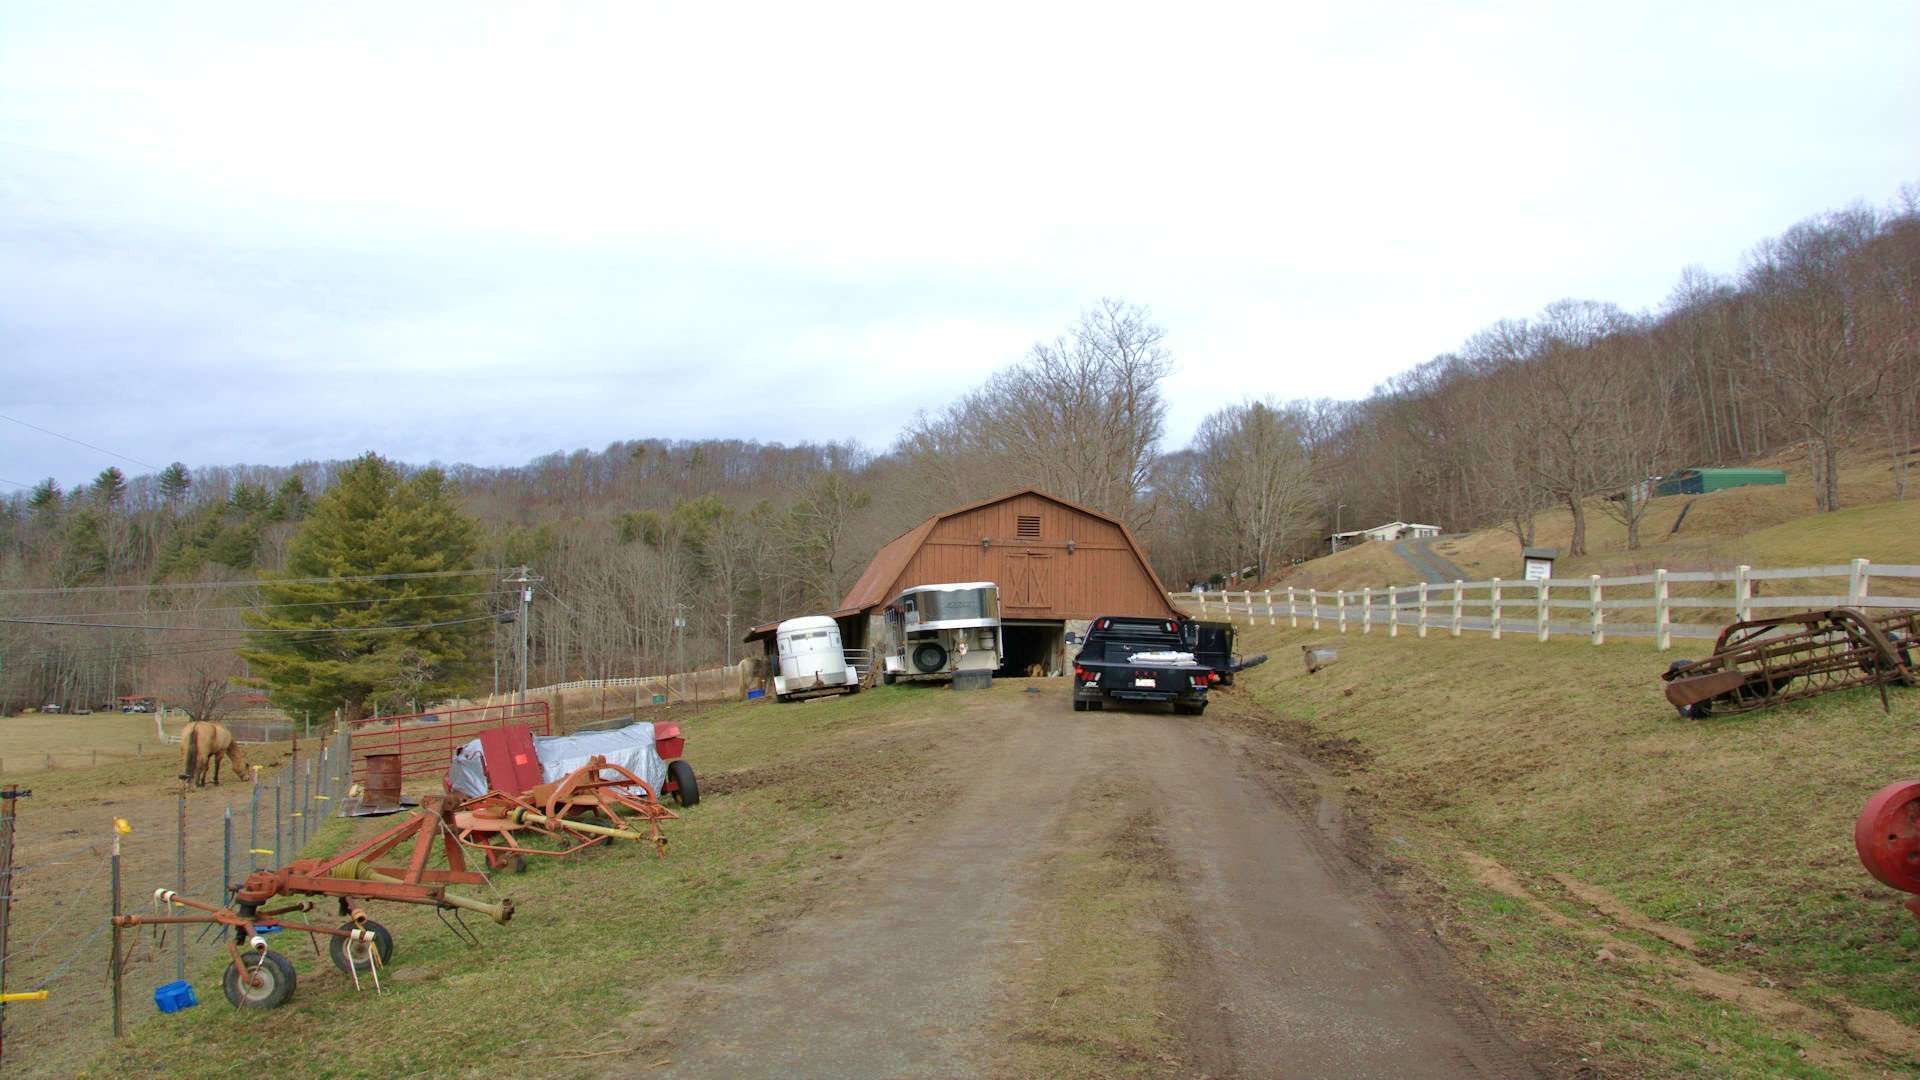 Two spacious barns offer storage for equipment or farm animals.